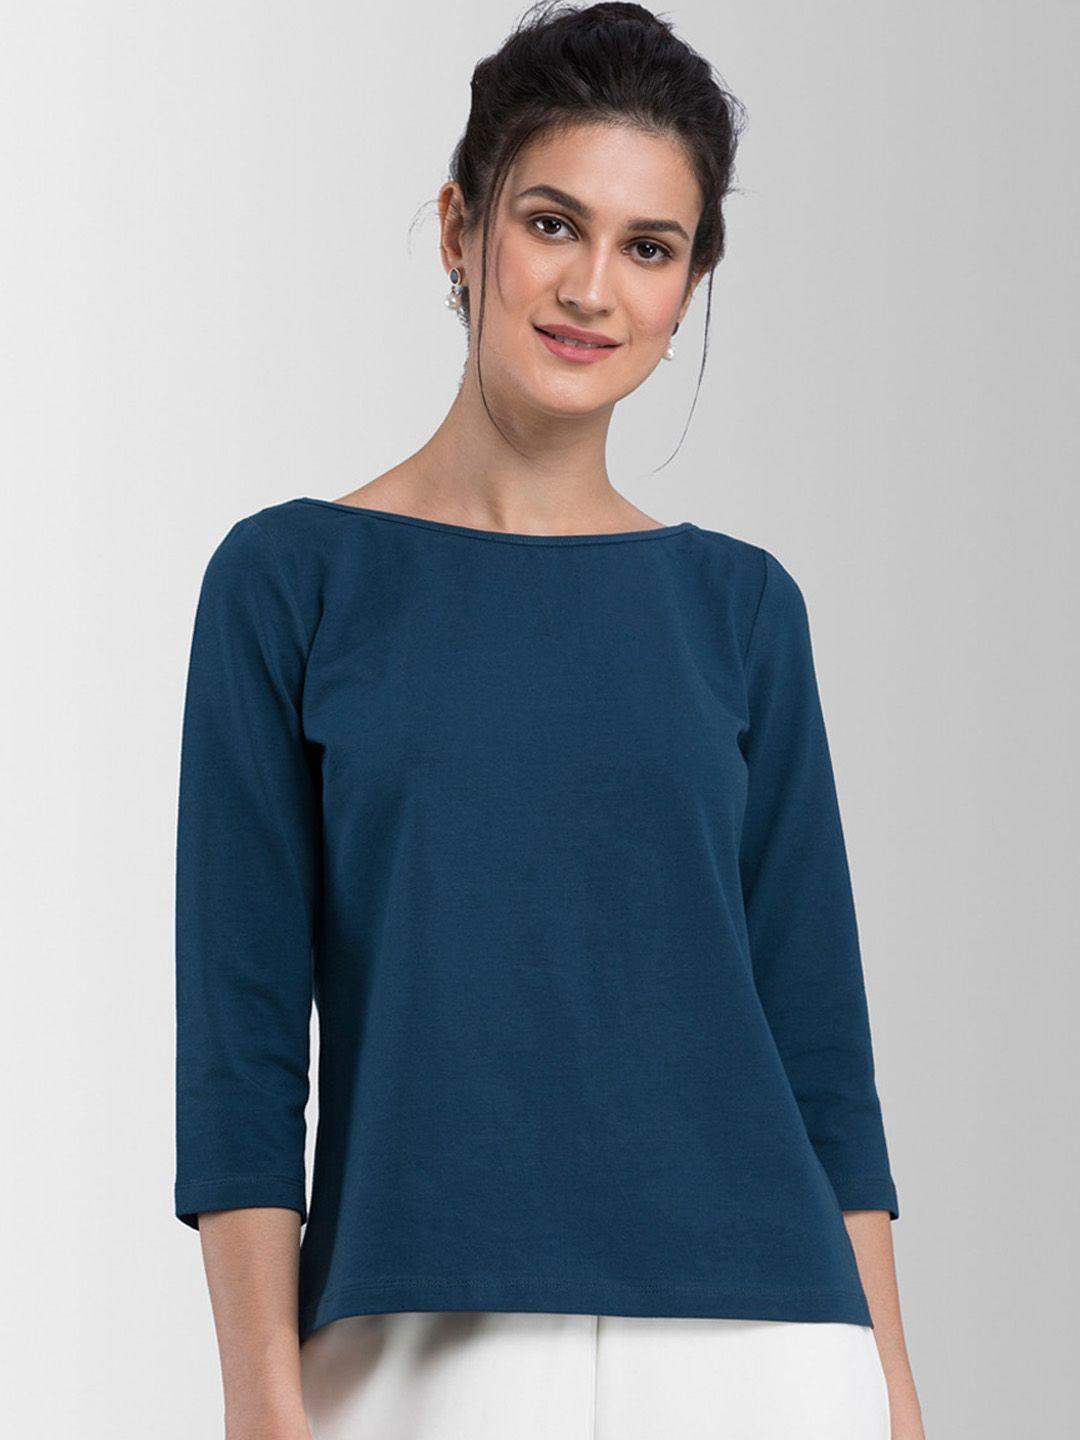 fablestreet women teal blue solid knitted top